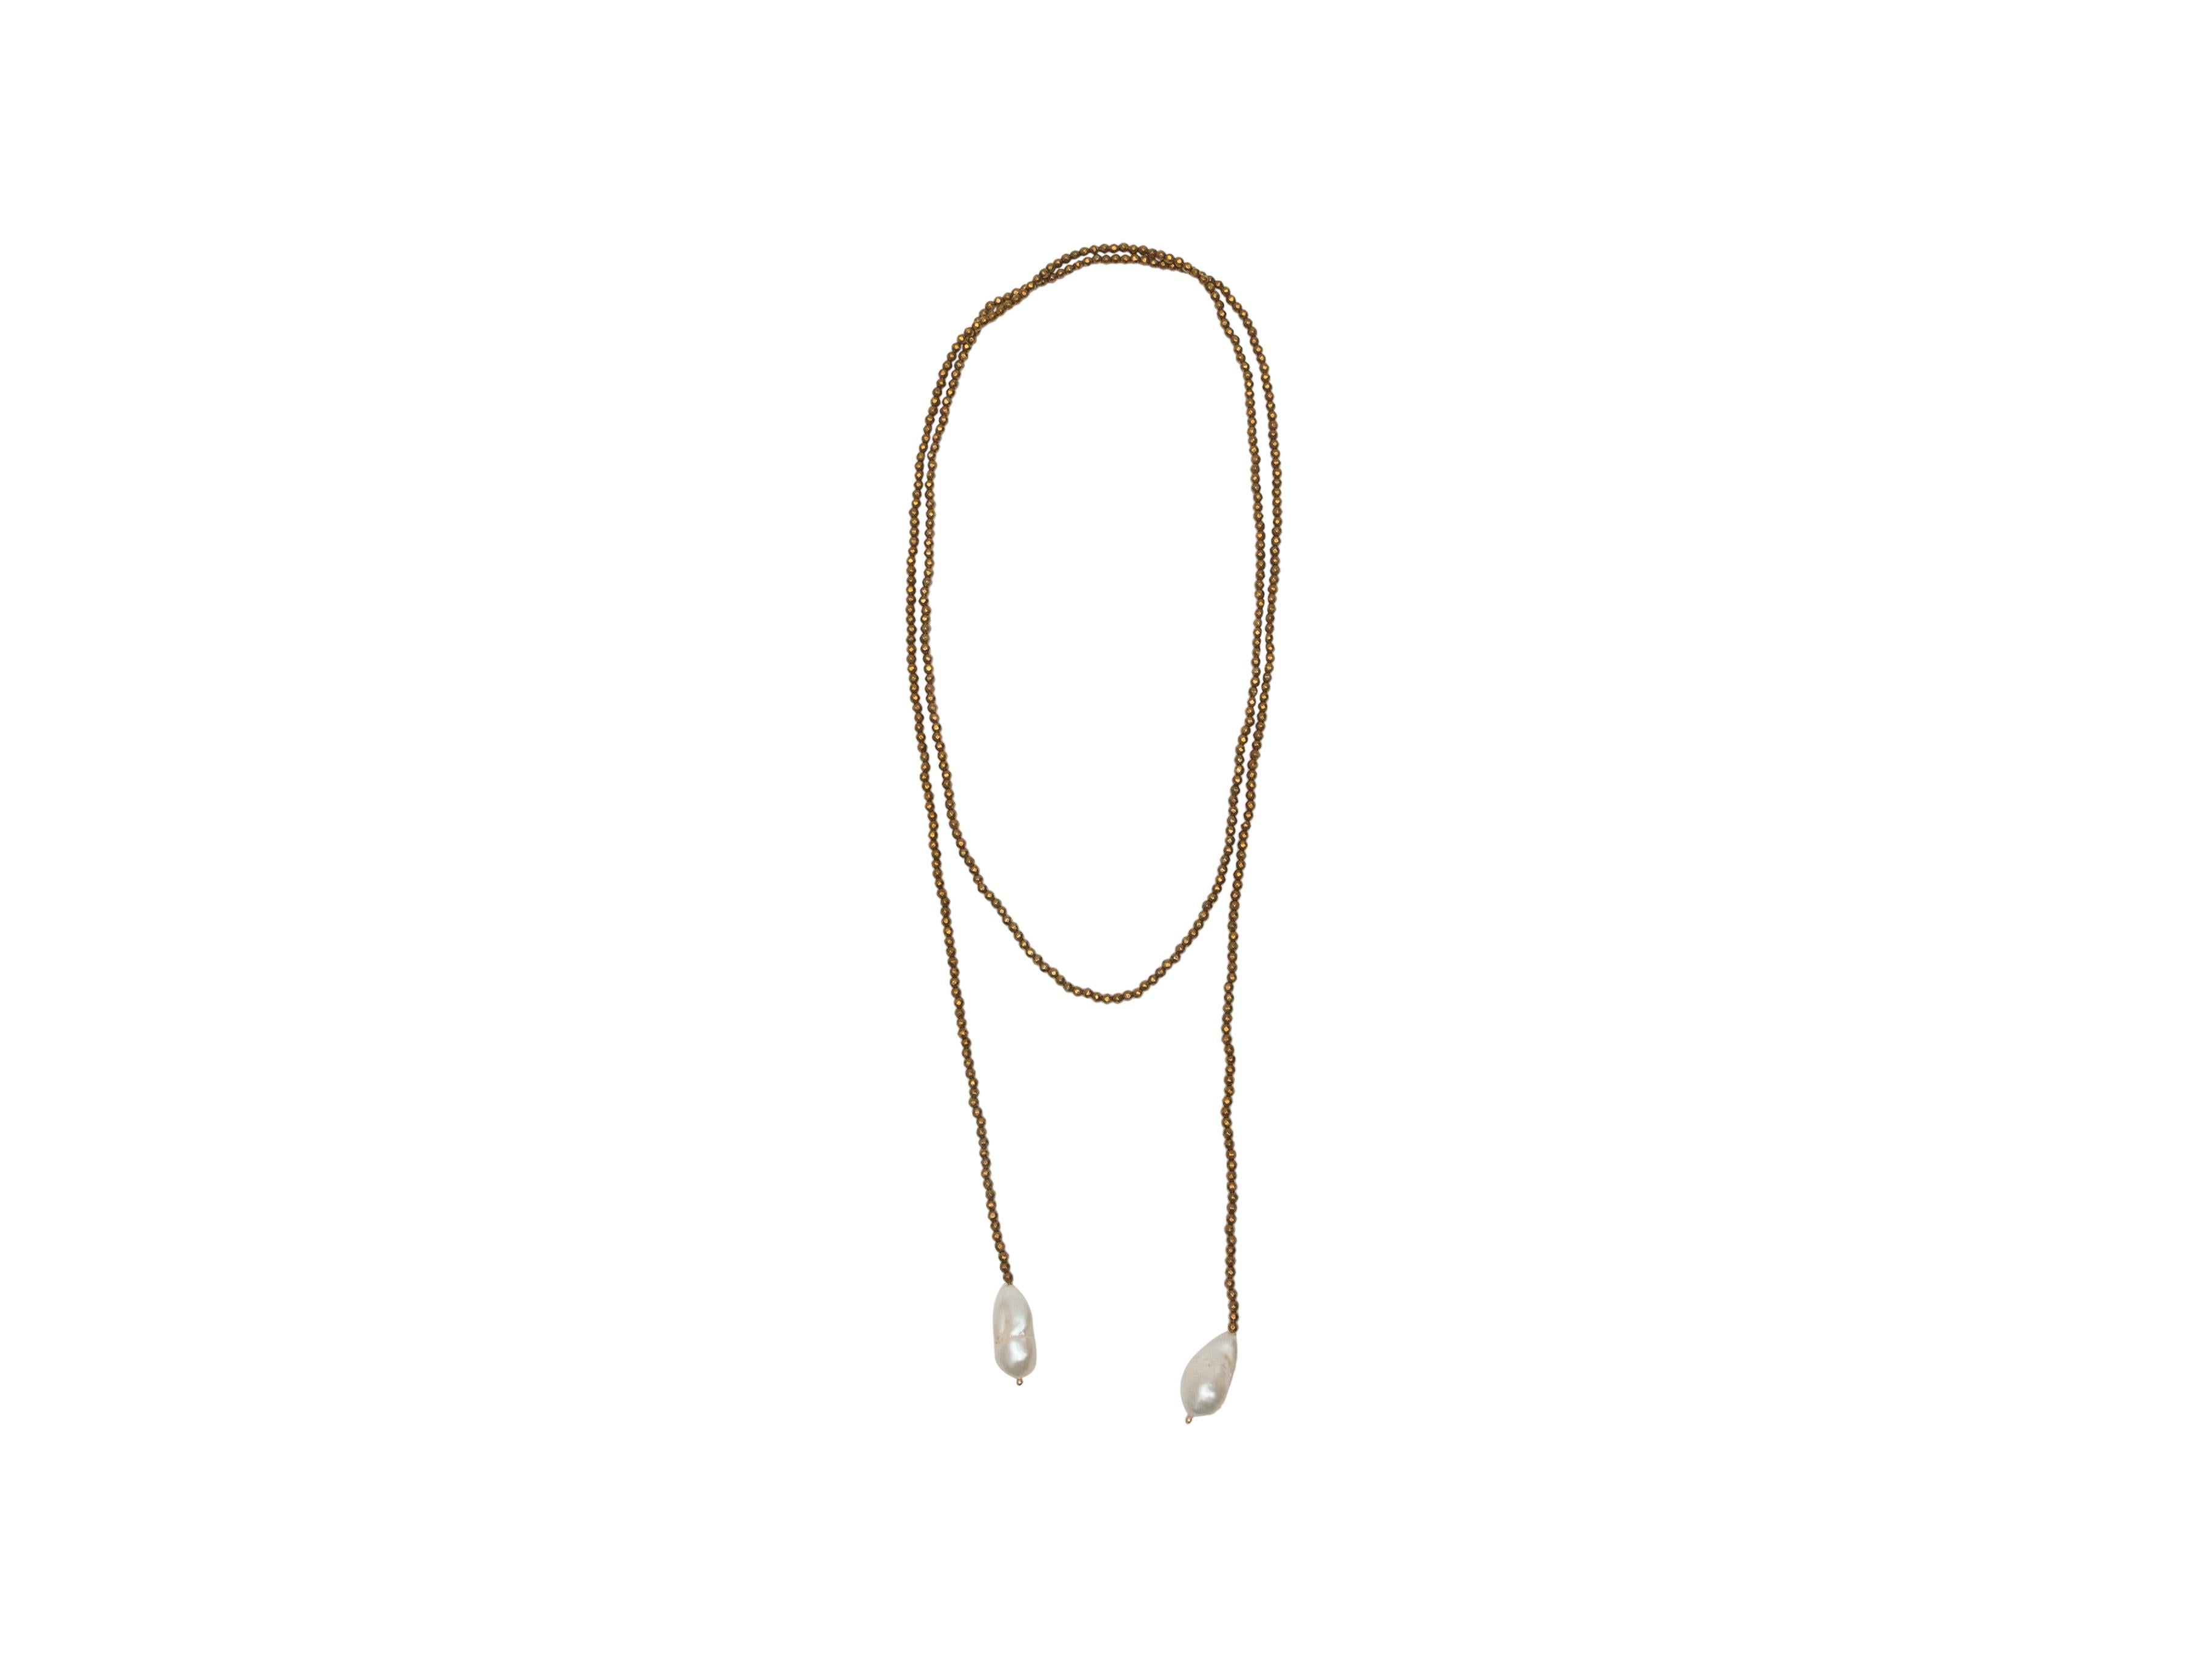 Product details: Bronze bead lariat necklace with baroque pearl ends. 51